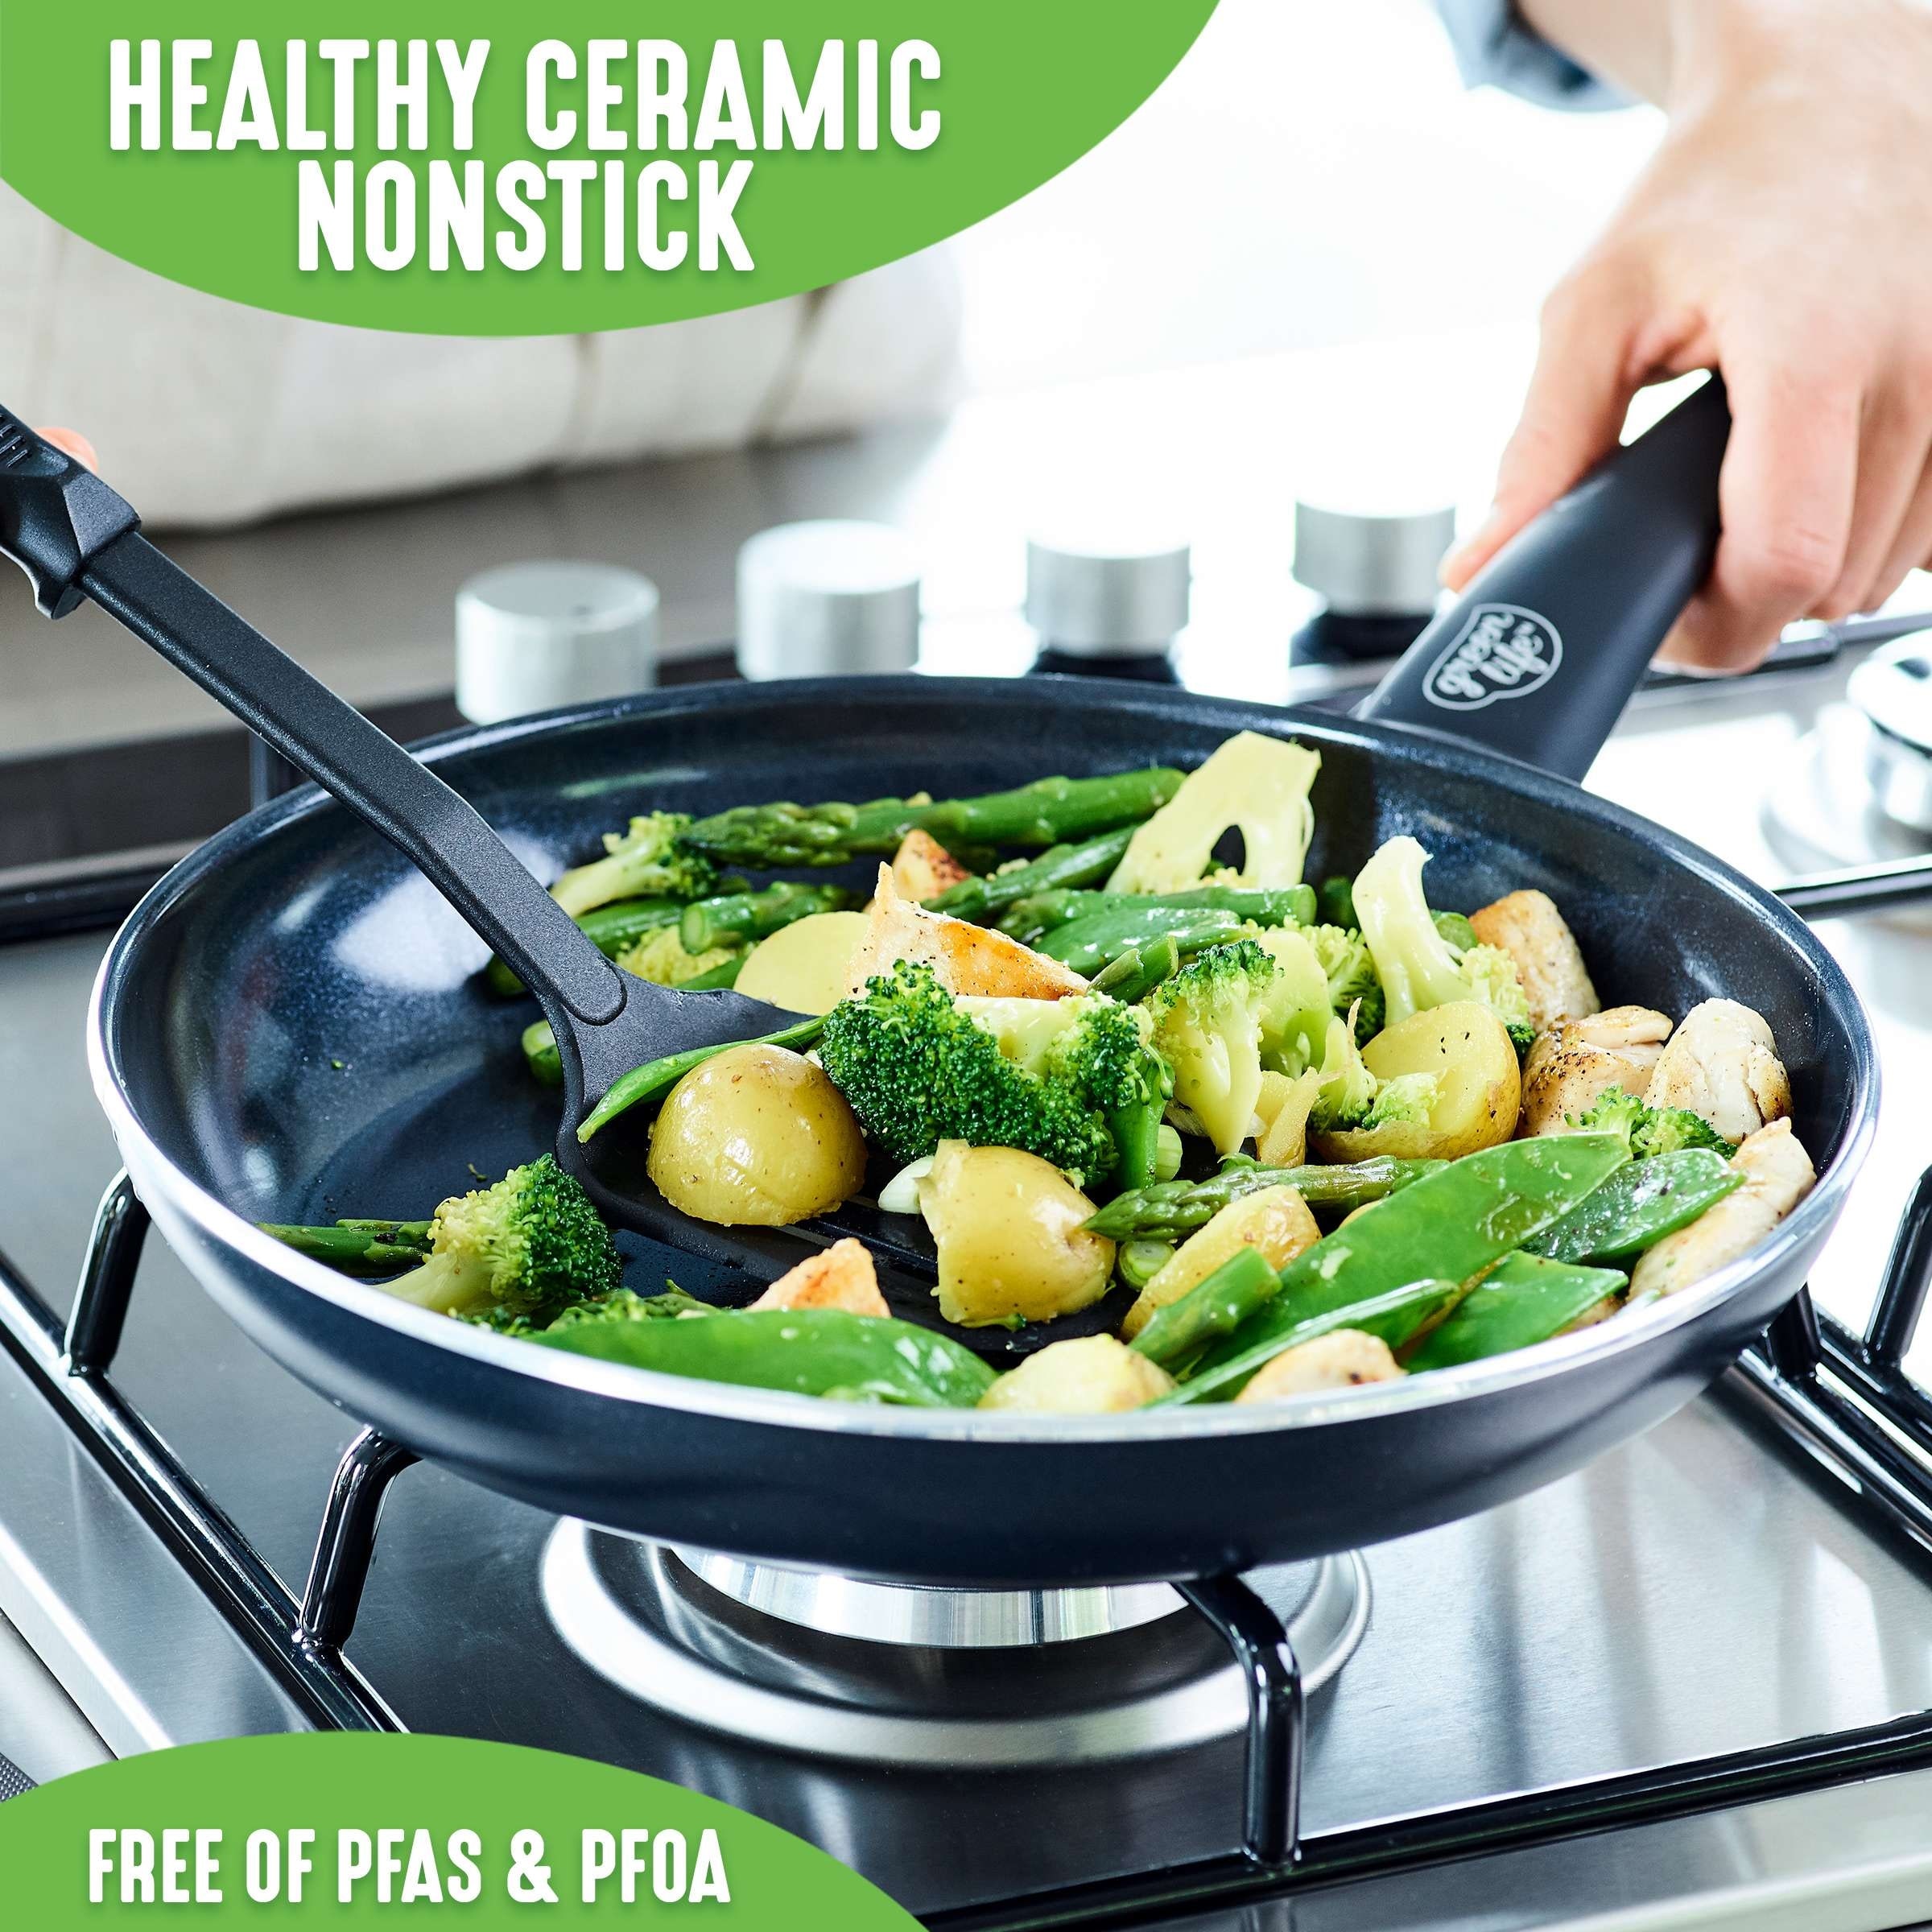 GreenLife Tri-Ply Stainless Steel Healthy Ceramic Nonstick,10